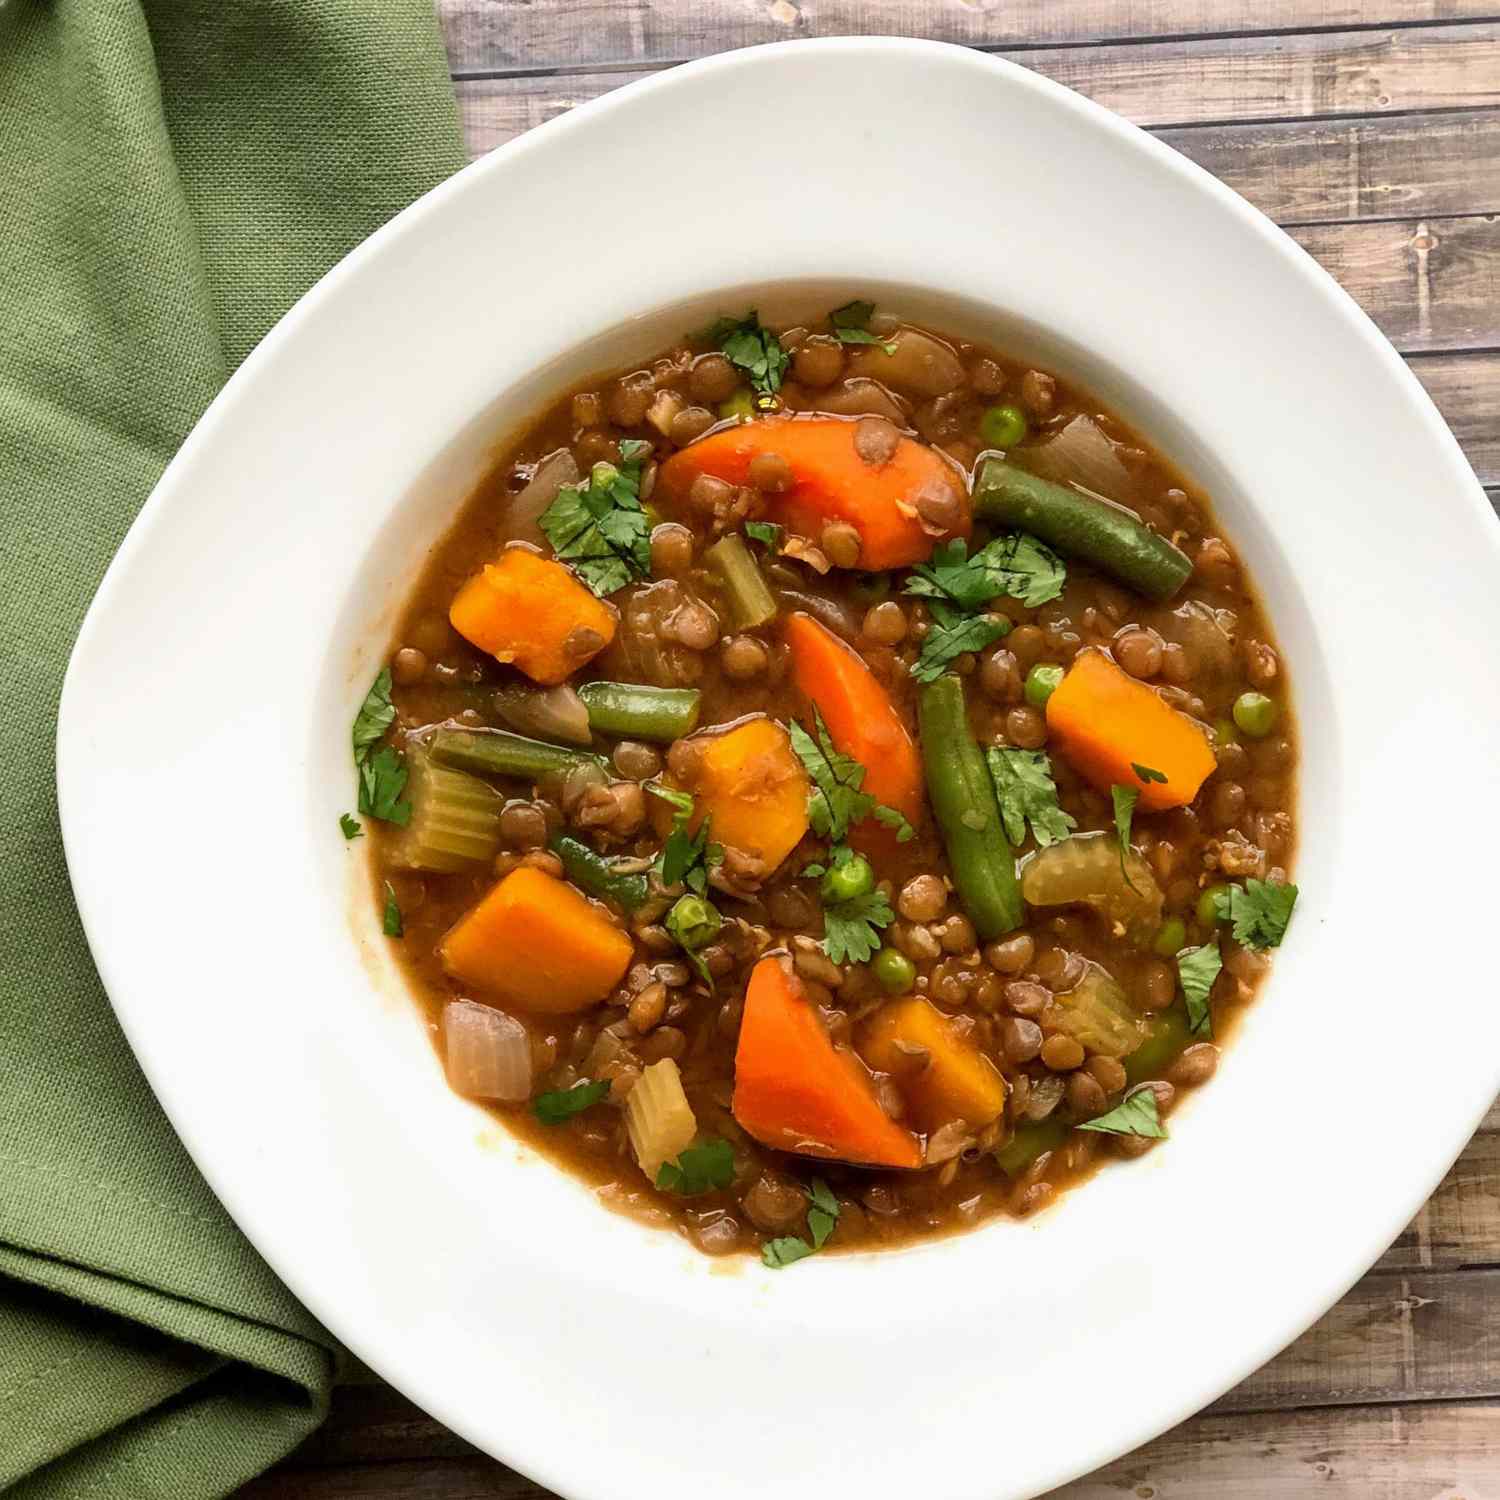 Moroccan Lentil Stew with butternut squash, green beans, and green peas